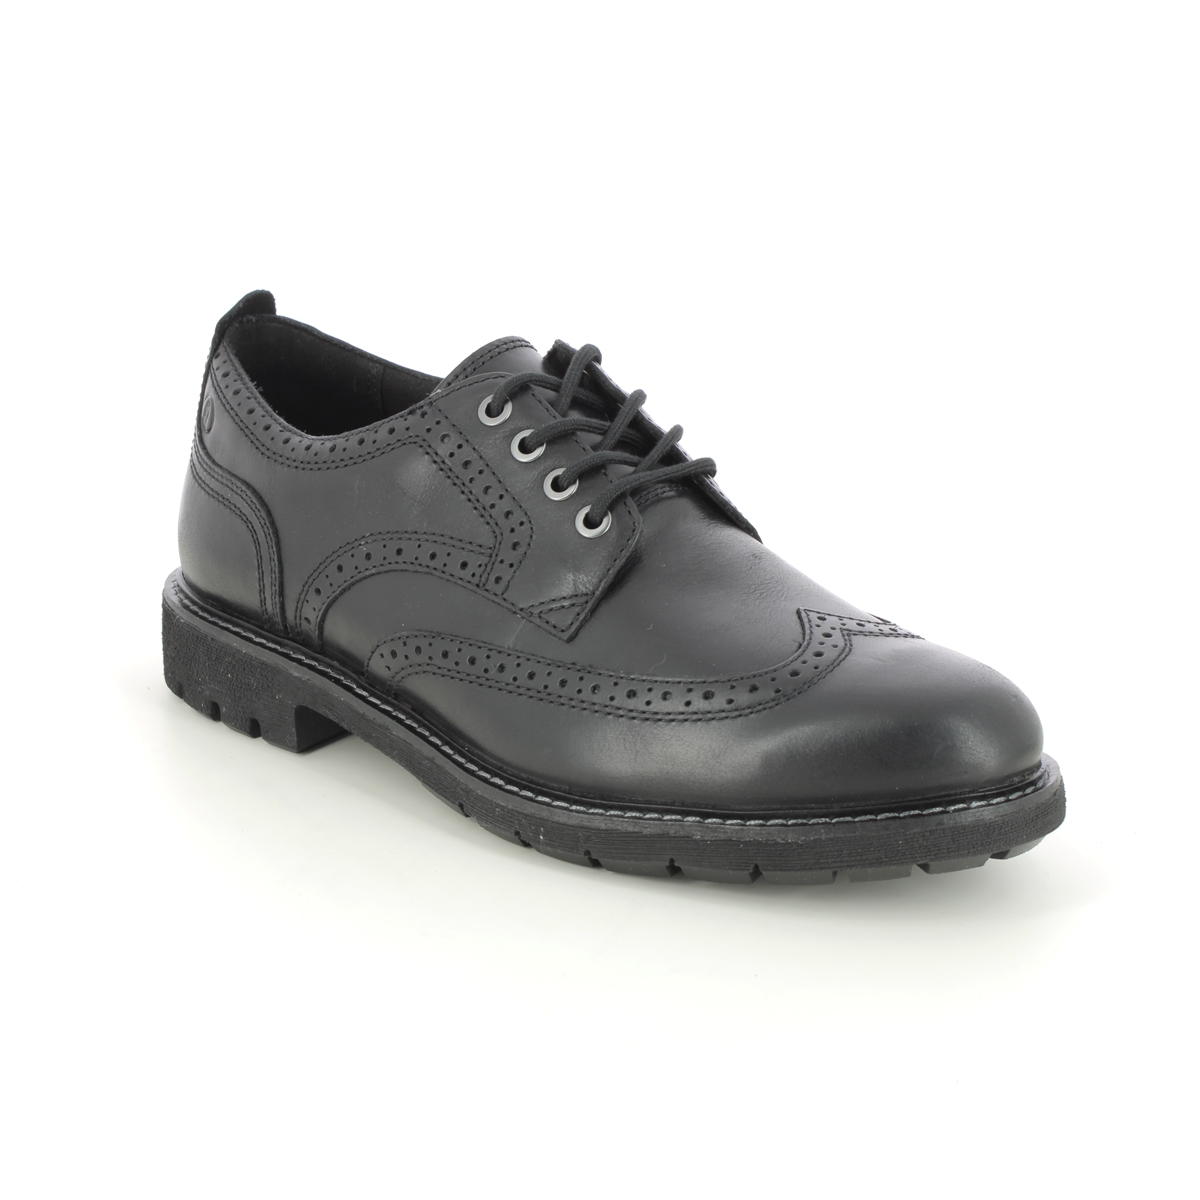 Clarks Batcombe Far Wing Black Leather Mens Brogues 734387G In Size 7 In Plain Black Leather G Width Fitting